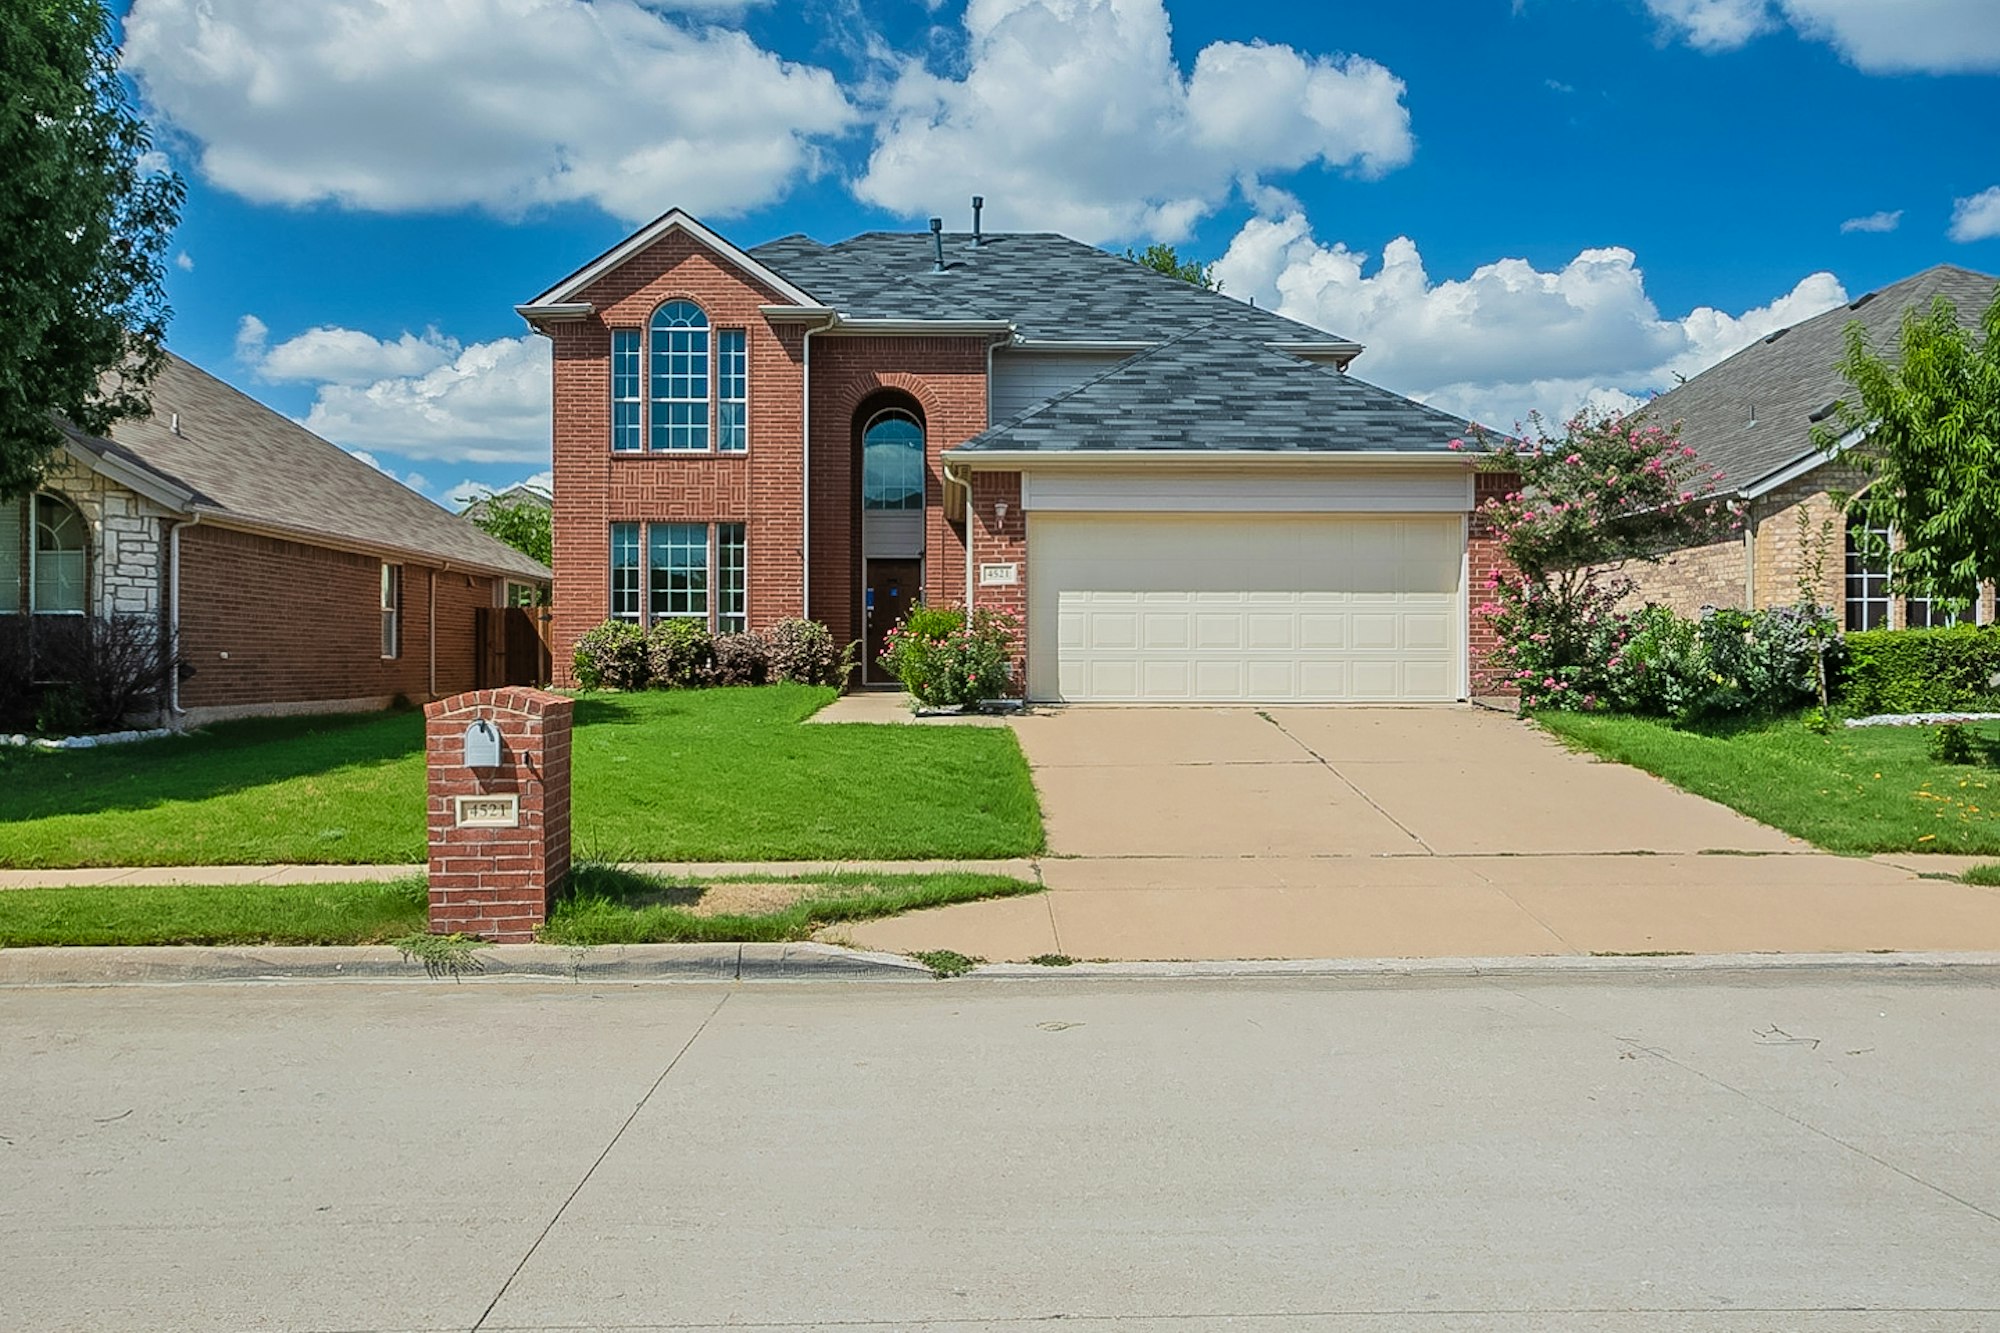 Photo 1 of 26 - 4521 Butterfly Way, Fort Worth, TX 76244